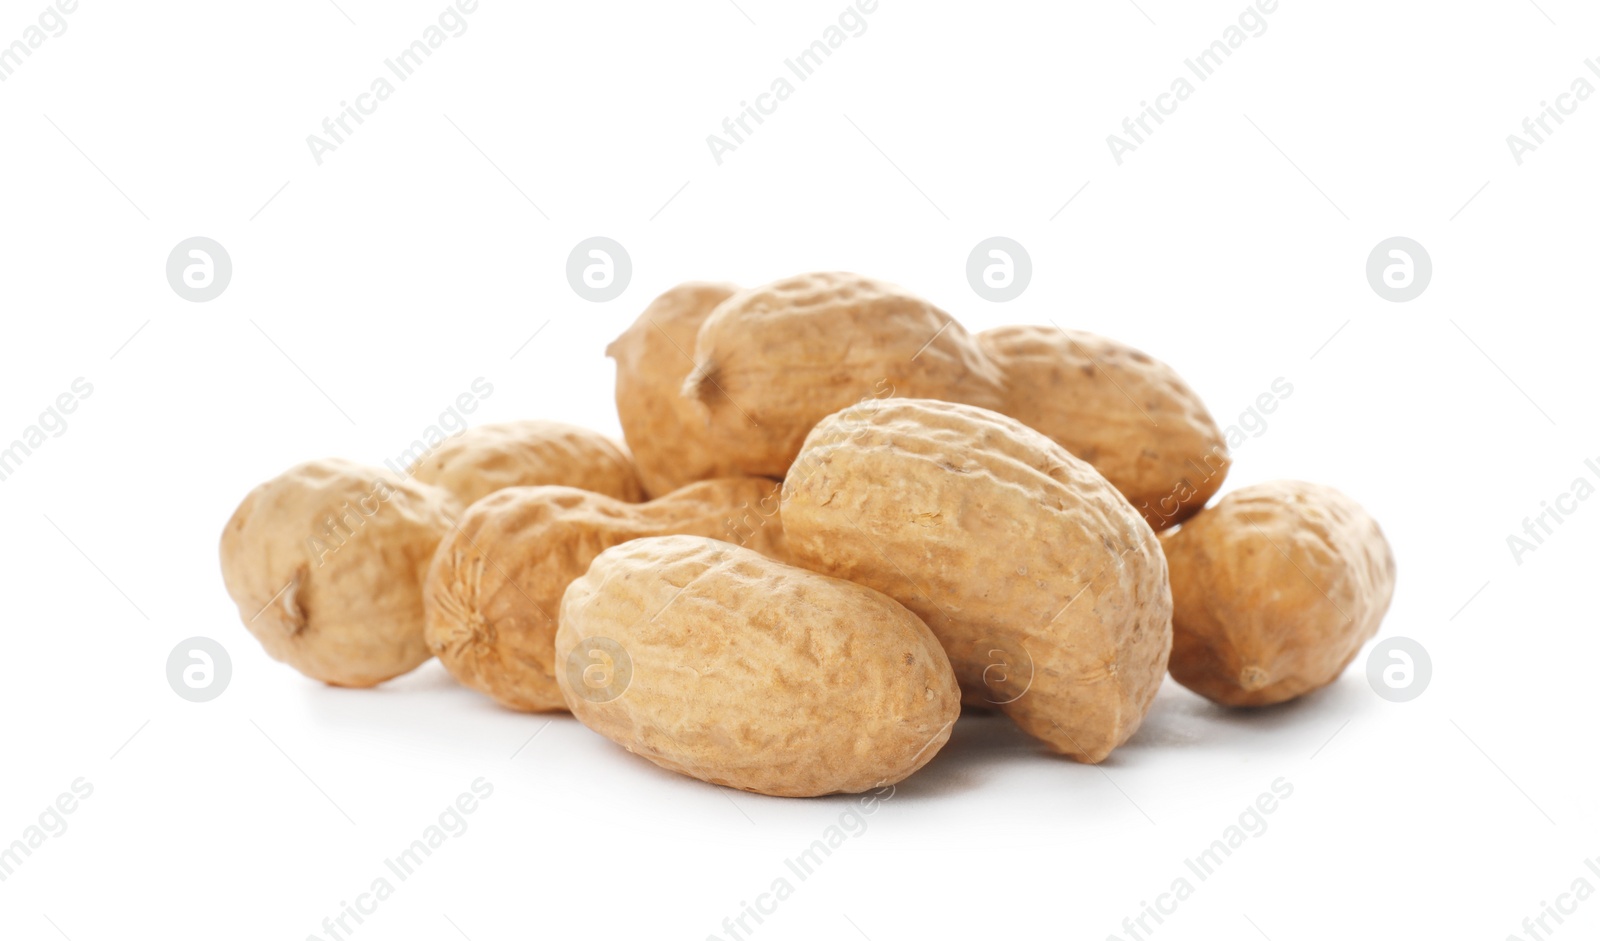 Photo of Raw peanuts in pods on white background